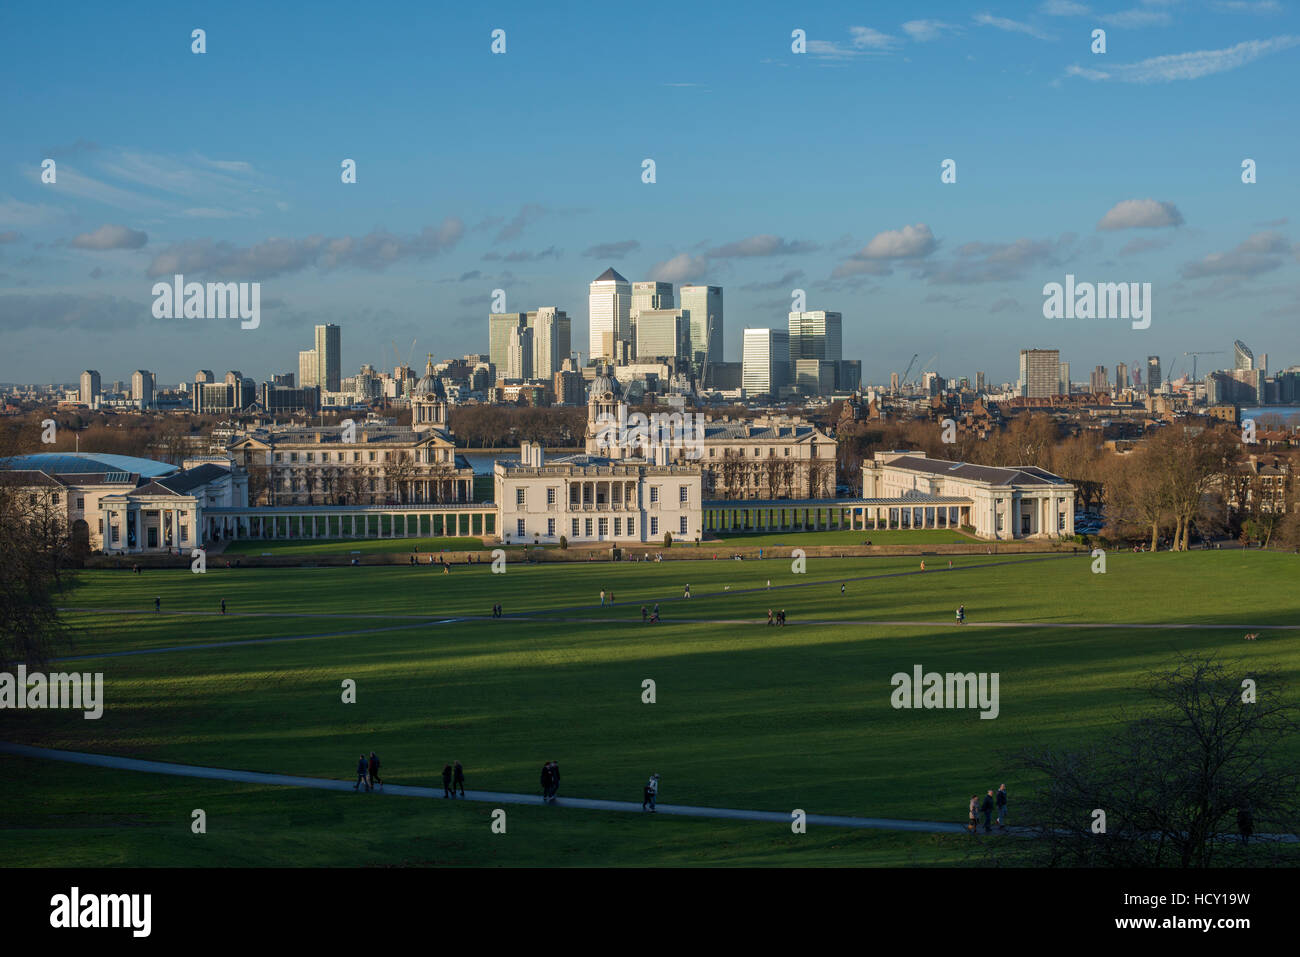 Mit Blick auf Canary Wharf und die Isle of Dogs, Docklands, vom Royal Observatory in Greenwich, London, UK Stockfoto